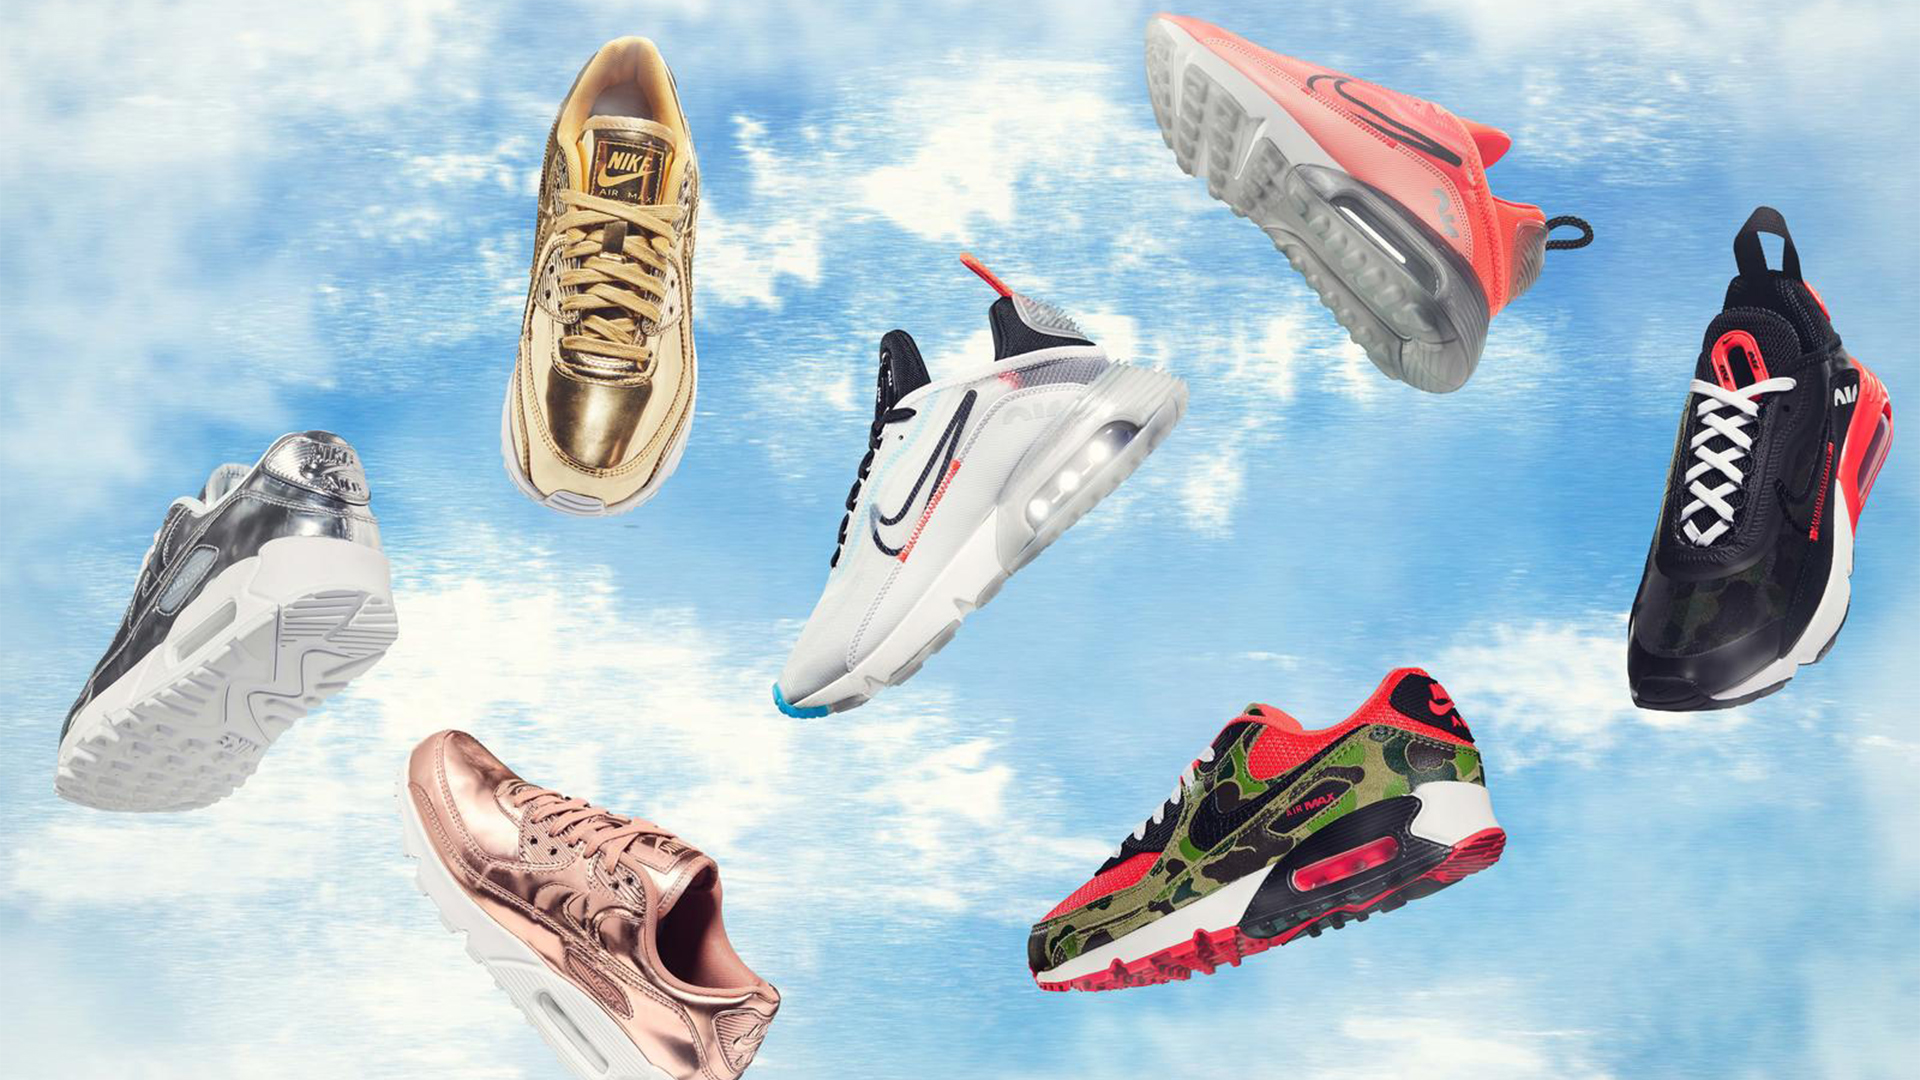 Virgil Abloh reimagines 10 iconic Nike silhouettes